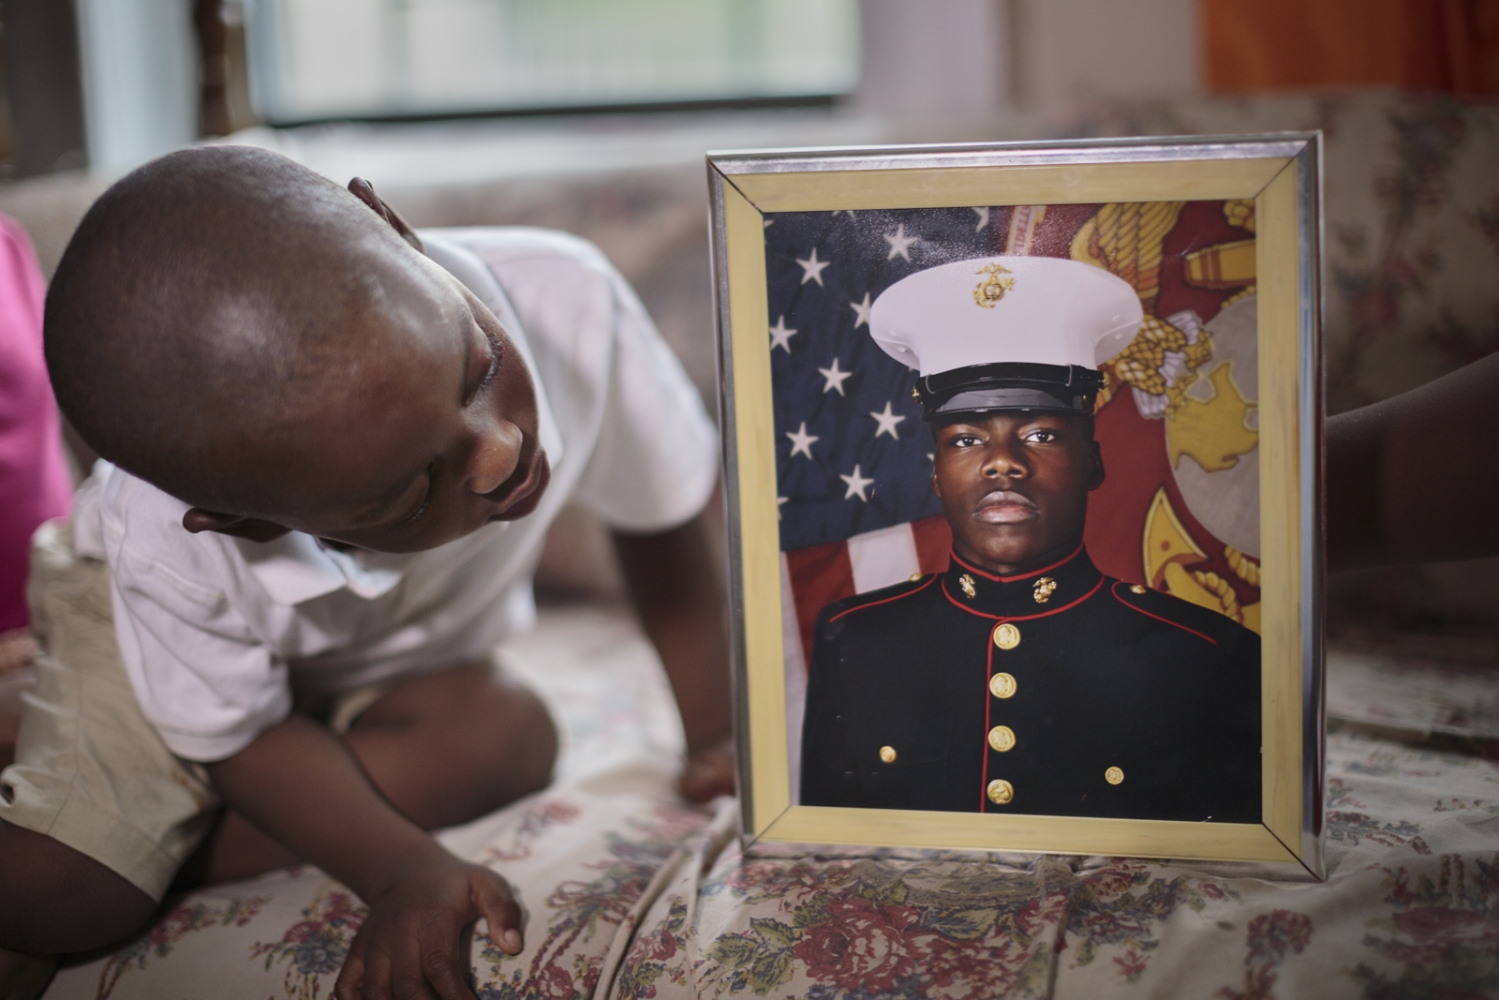  Didier Mejia looks at his cousinâ€™s military photograph. Many immigrants join the U.S. military...